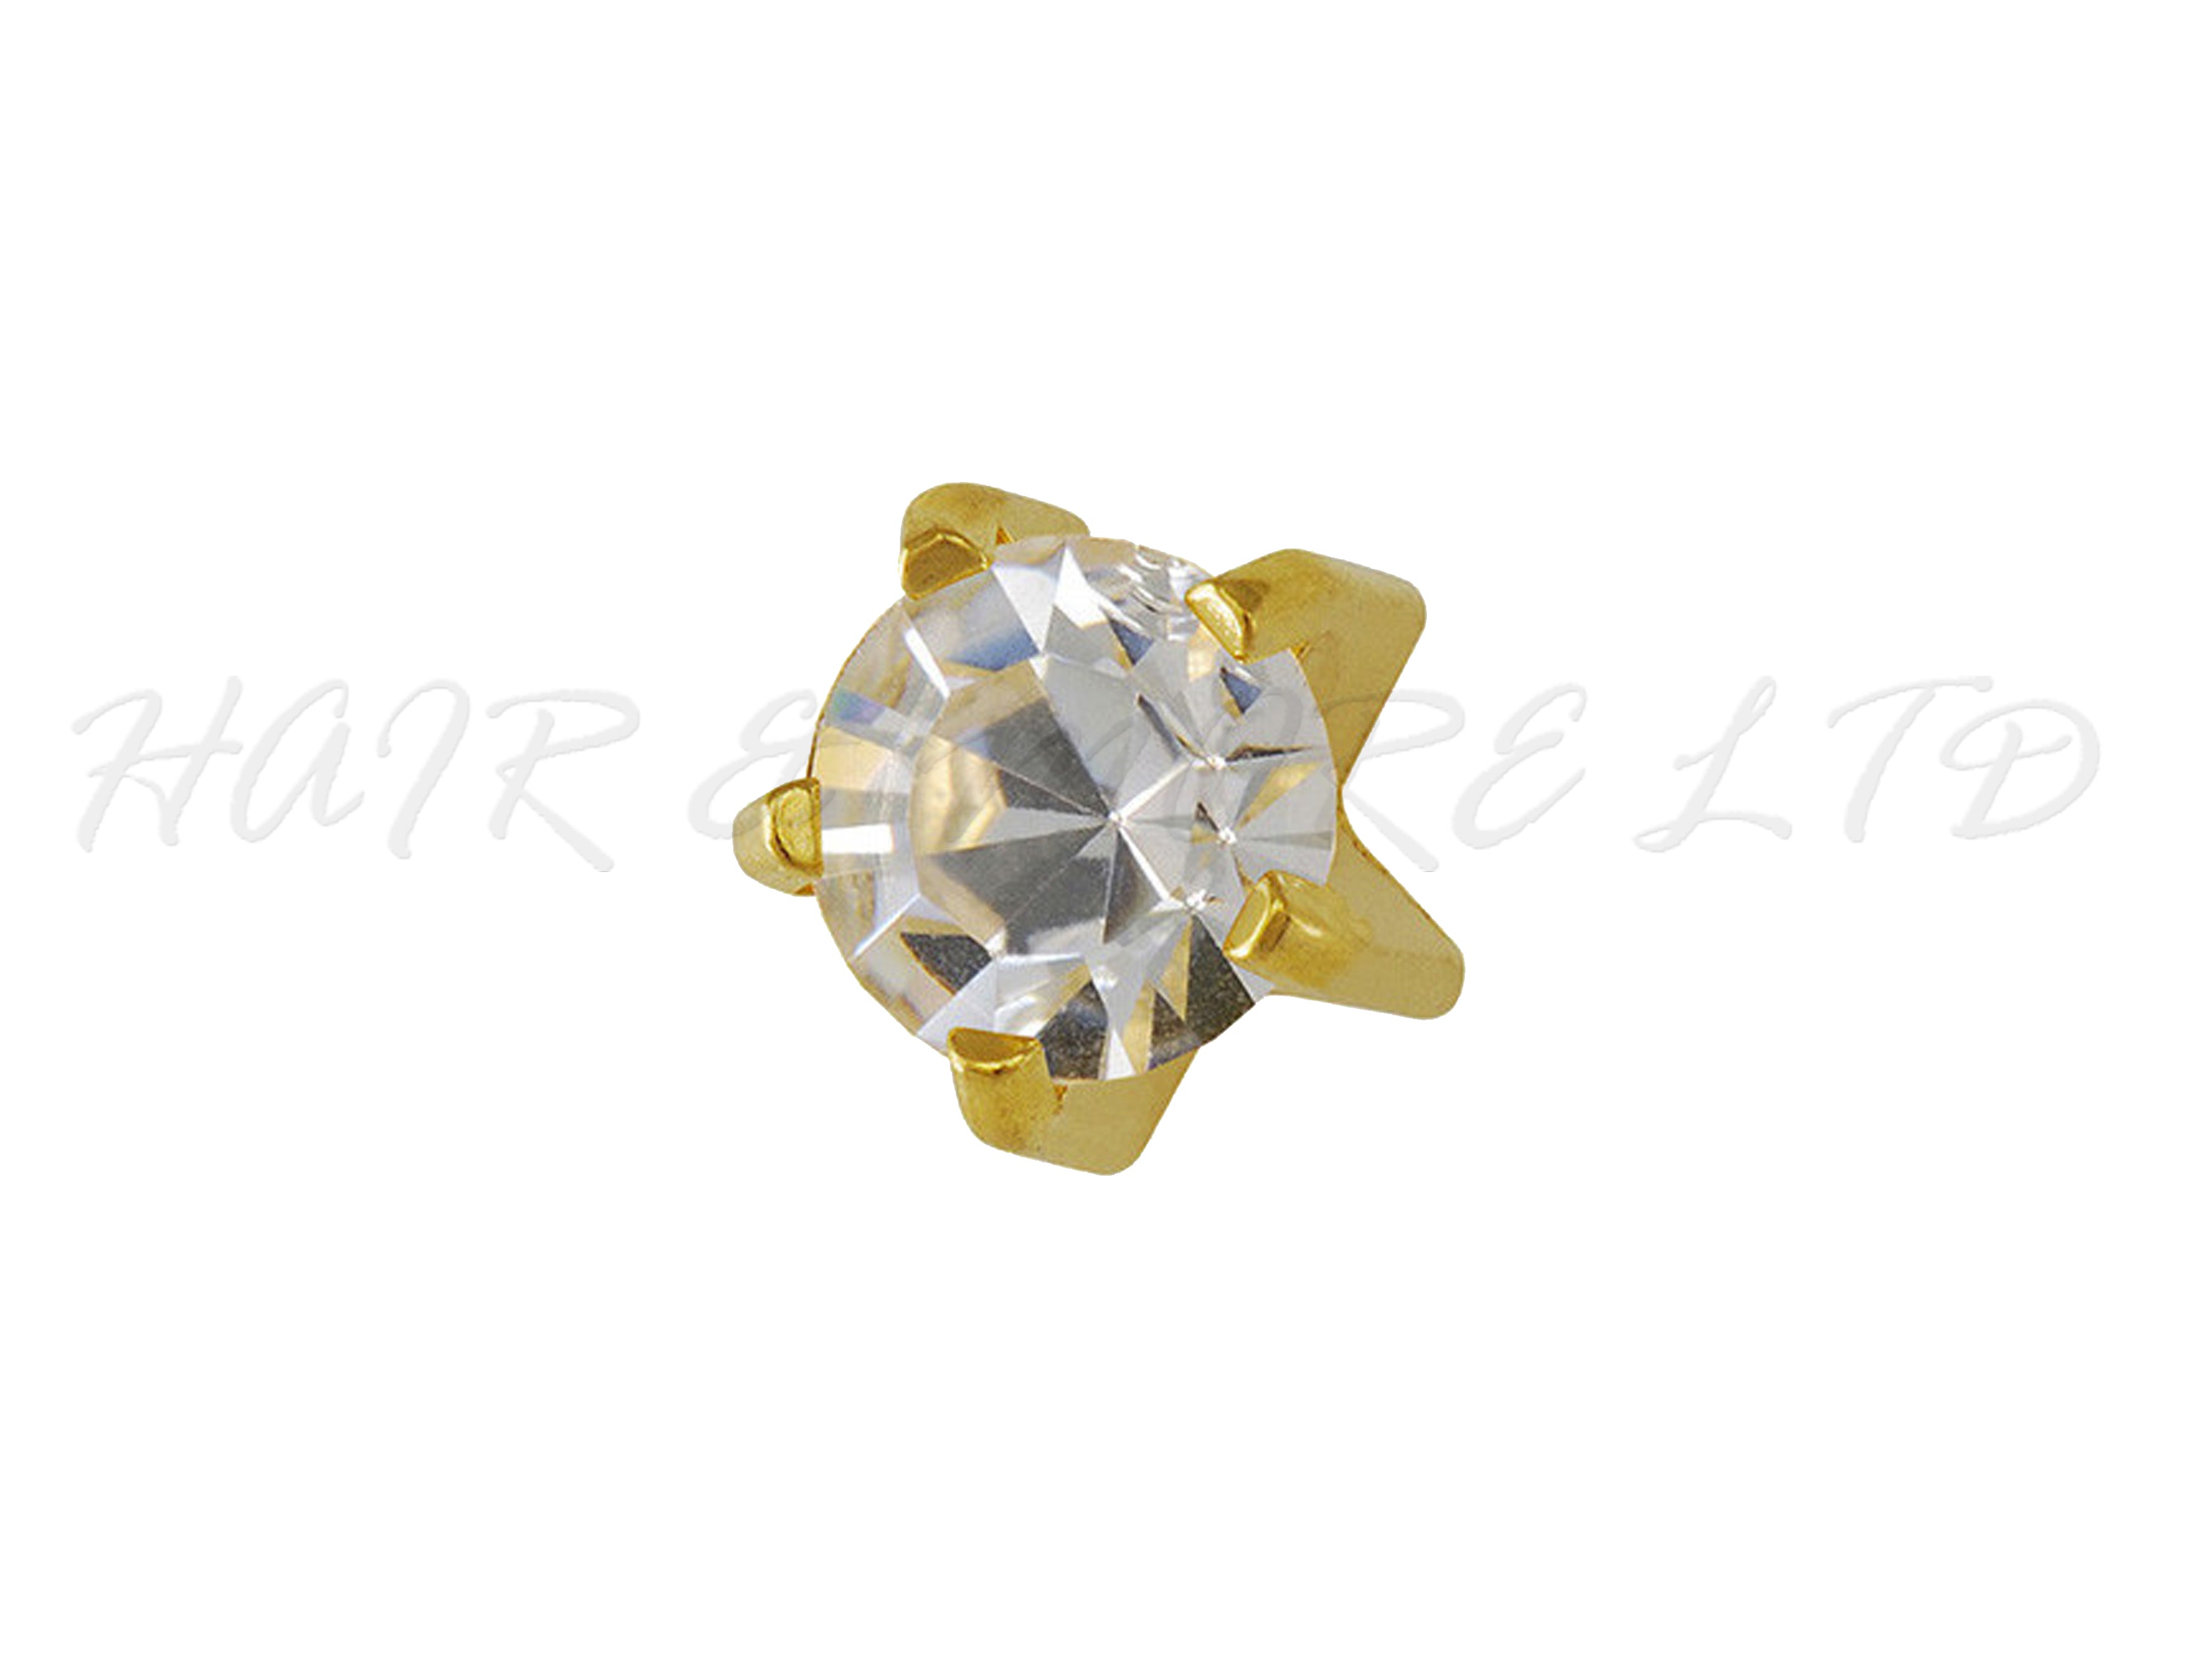 SPE Gold - Circle Shaped Stone Gold Nosepin - Poonamallee